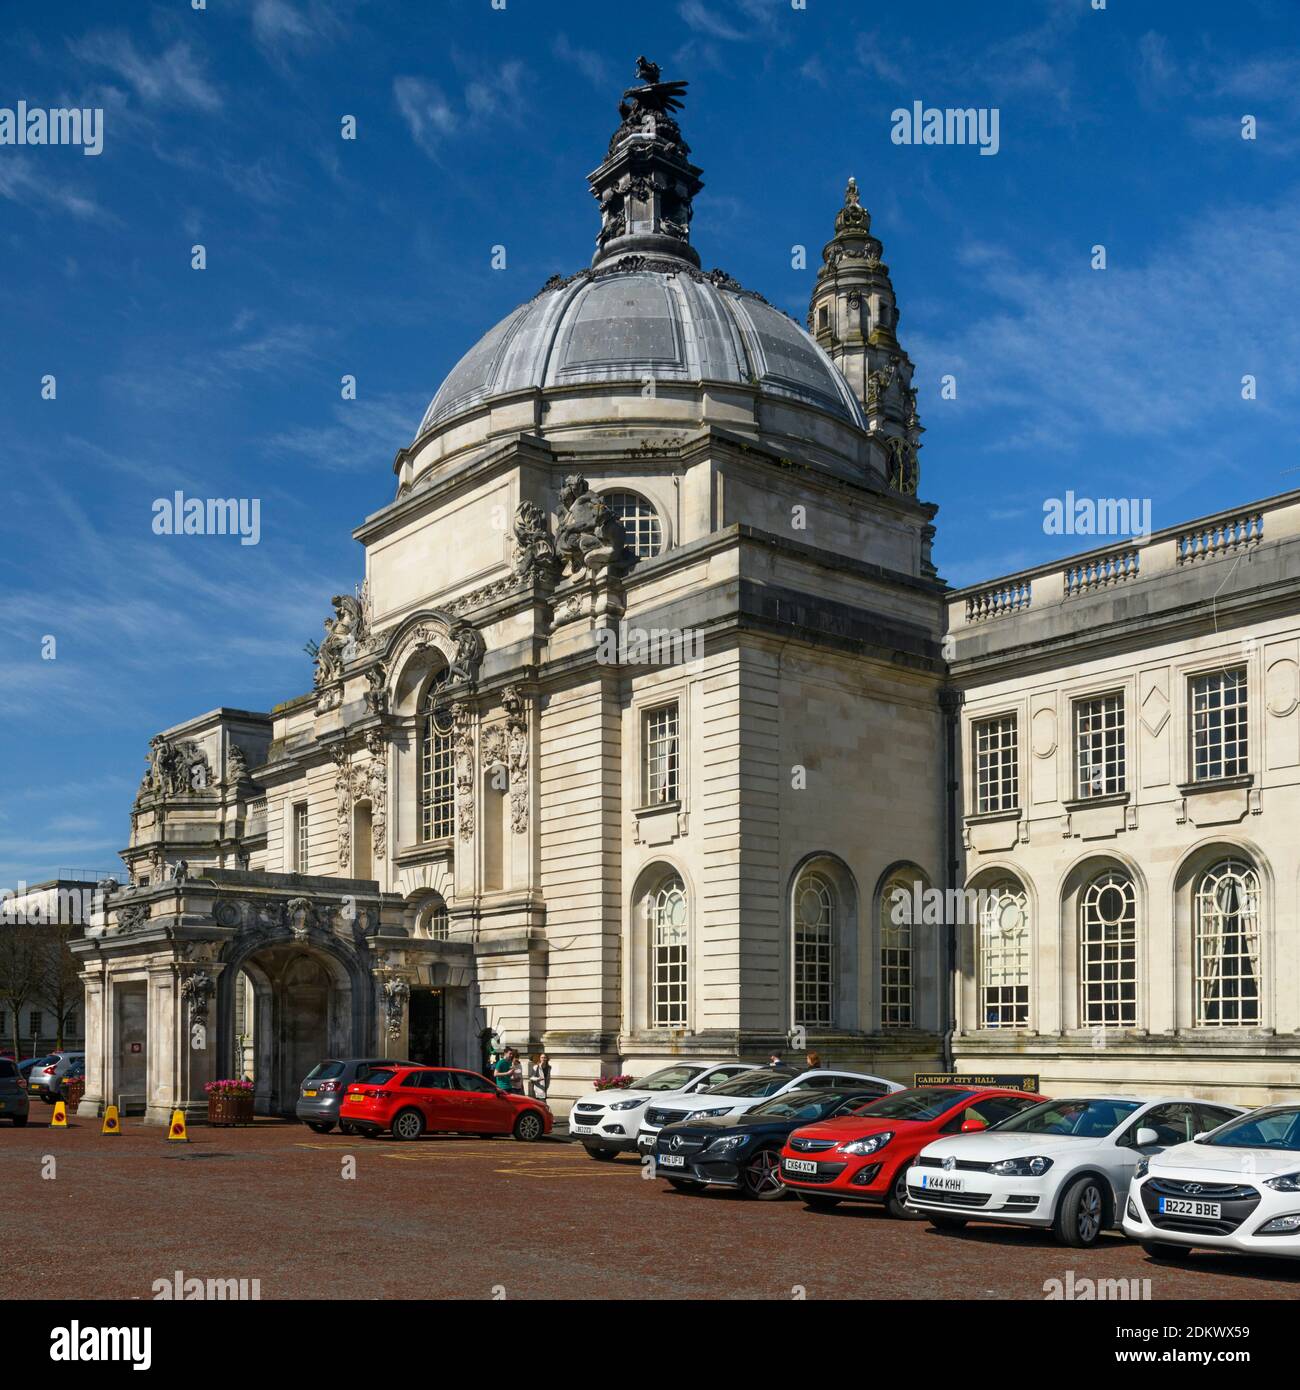 City Hall in Cardiff exterior (grand historic civic centre landmark building, dome, clock tower, entrance portico, bright blue sky, cars) - Wales, UK. Stock Photo